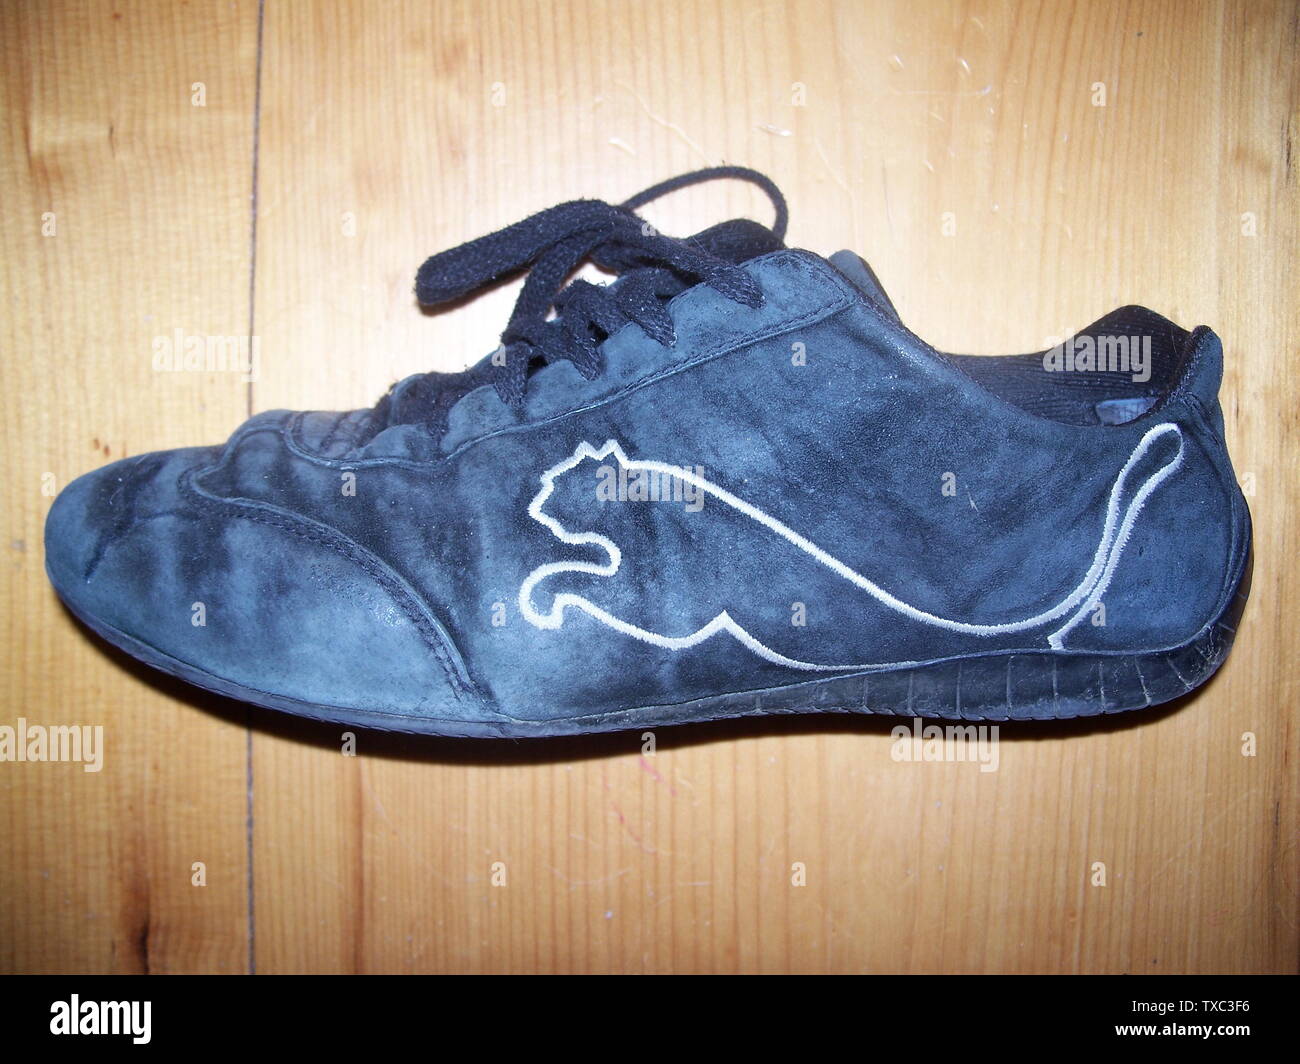 Picture of one of my black (not blue) Puma shoes; 6/1/07 1 June 2007  (original upload date); taken by me Transferred from en.pedia to Commons by  Sevela.p using CommonsHelper.; The original uploader